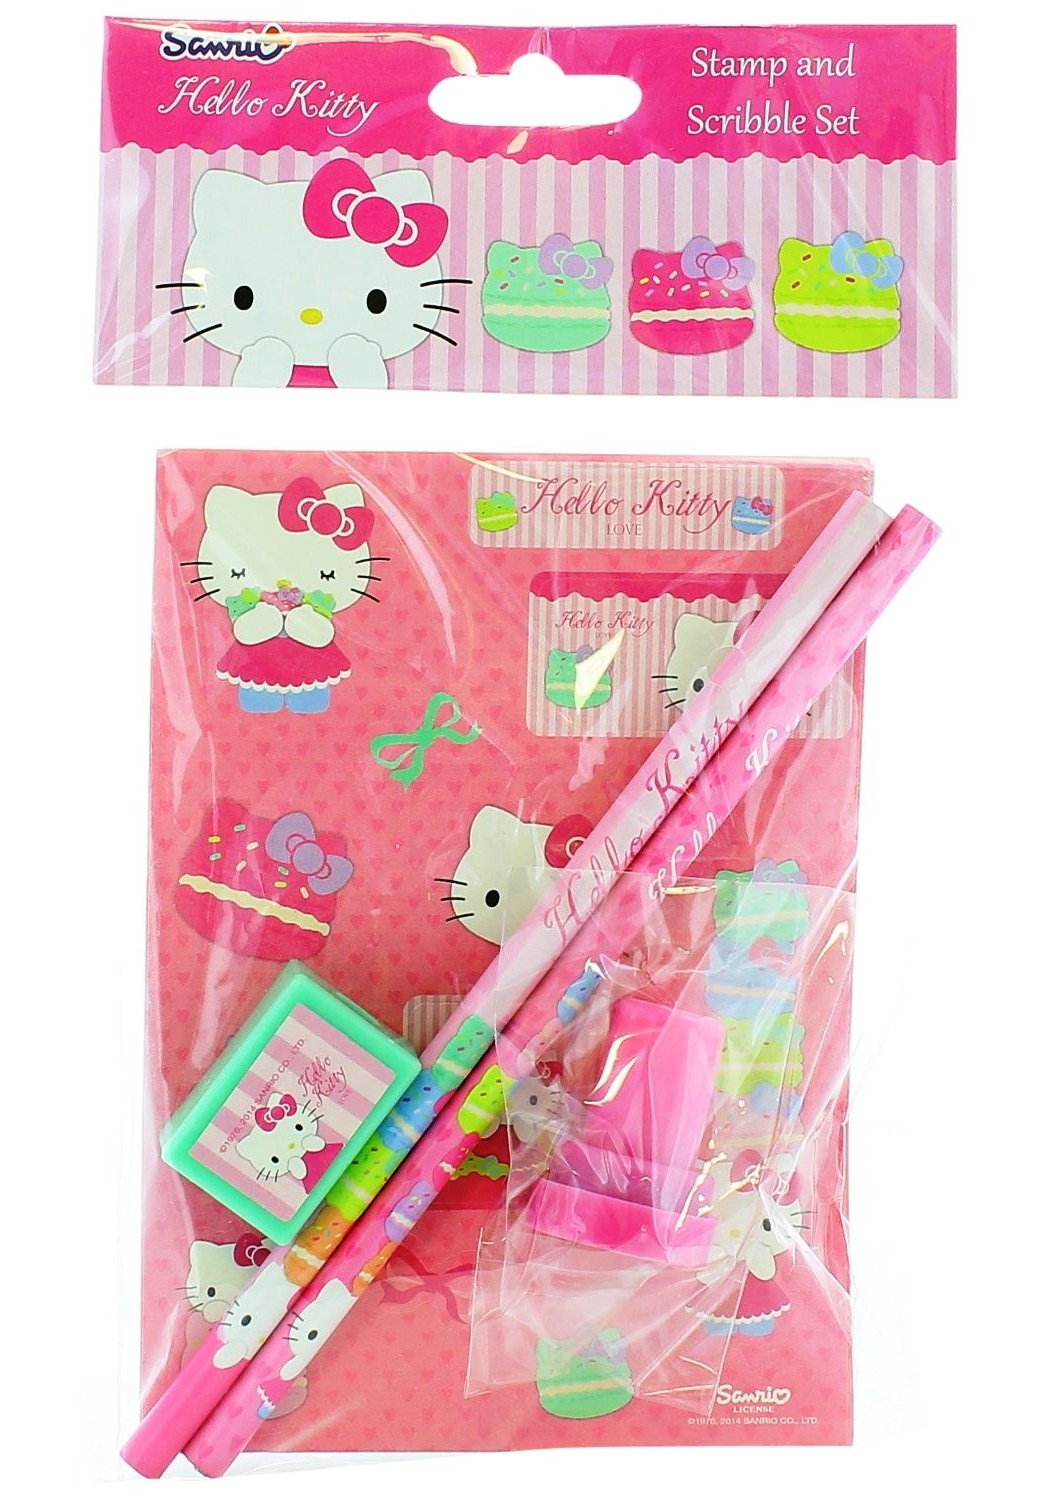 Hello Kitty - Stamp And Scribble Set - 2014 - NEW